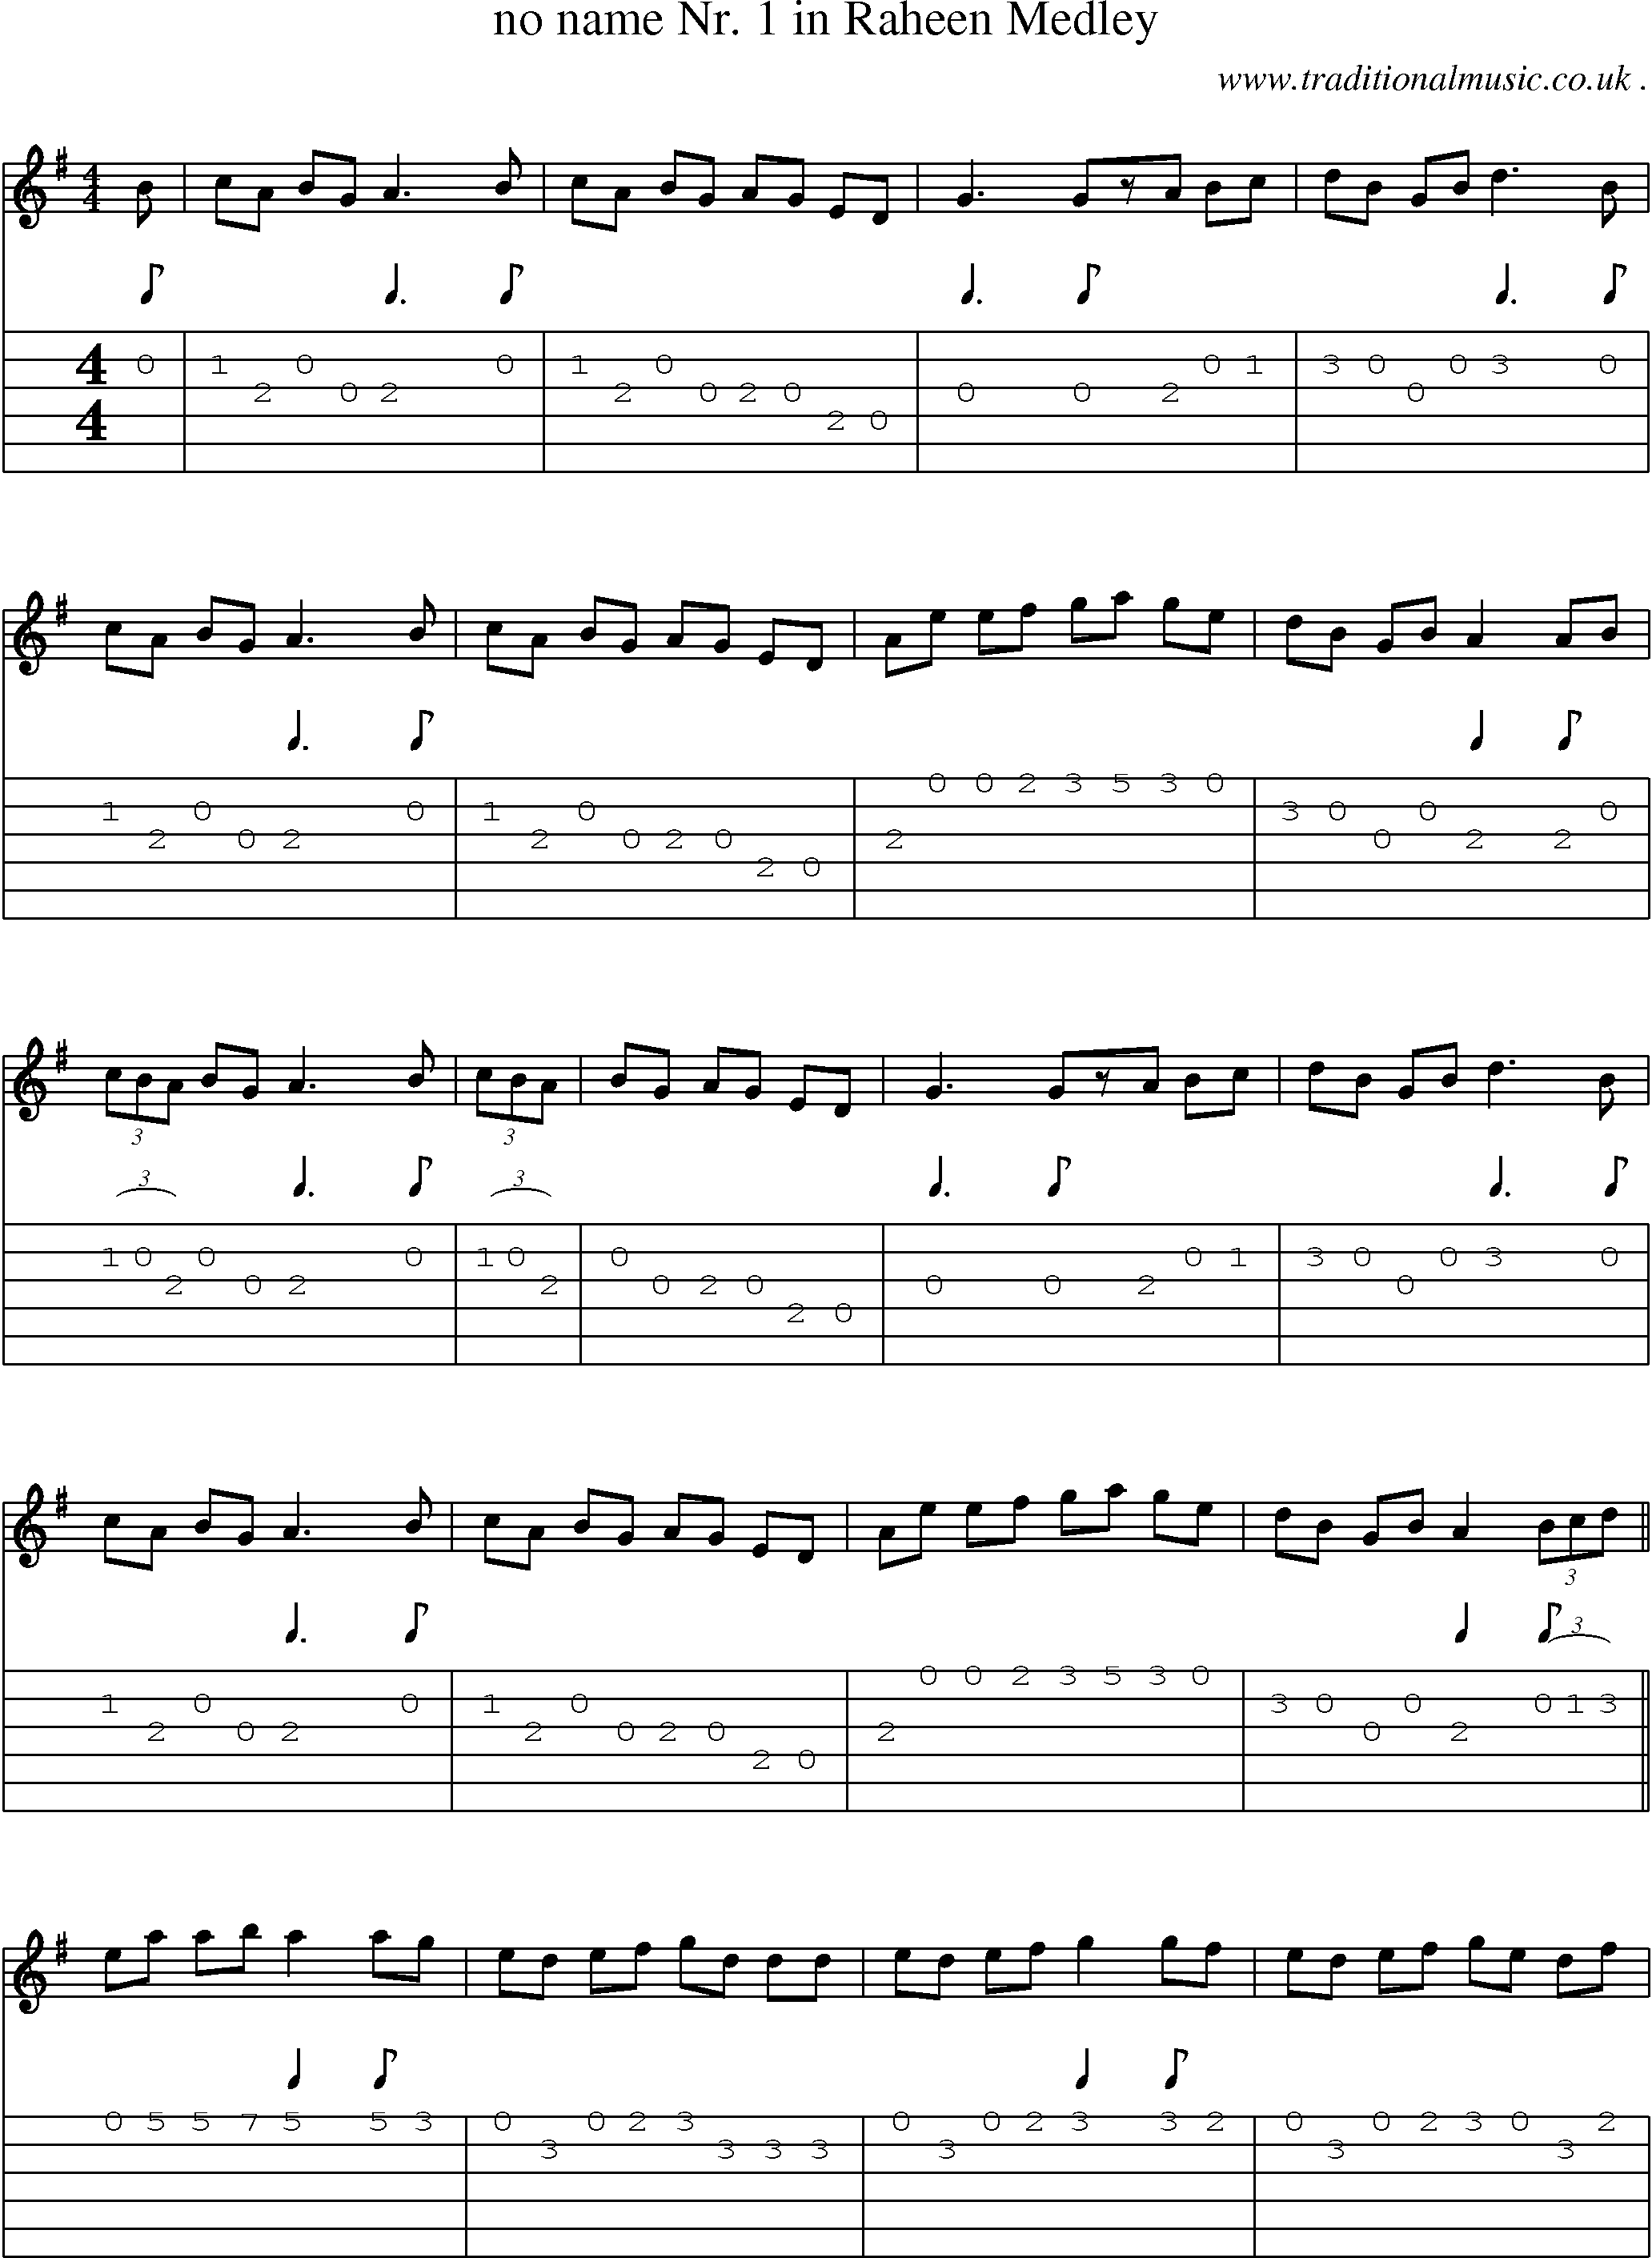 Sheet-Music and Guitar Tabs for No Name Nr 1 In Raheen Medley